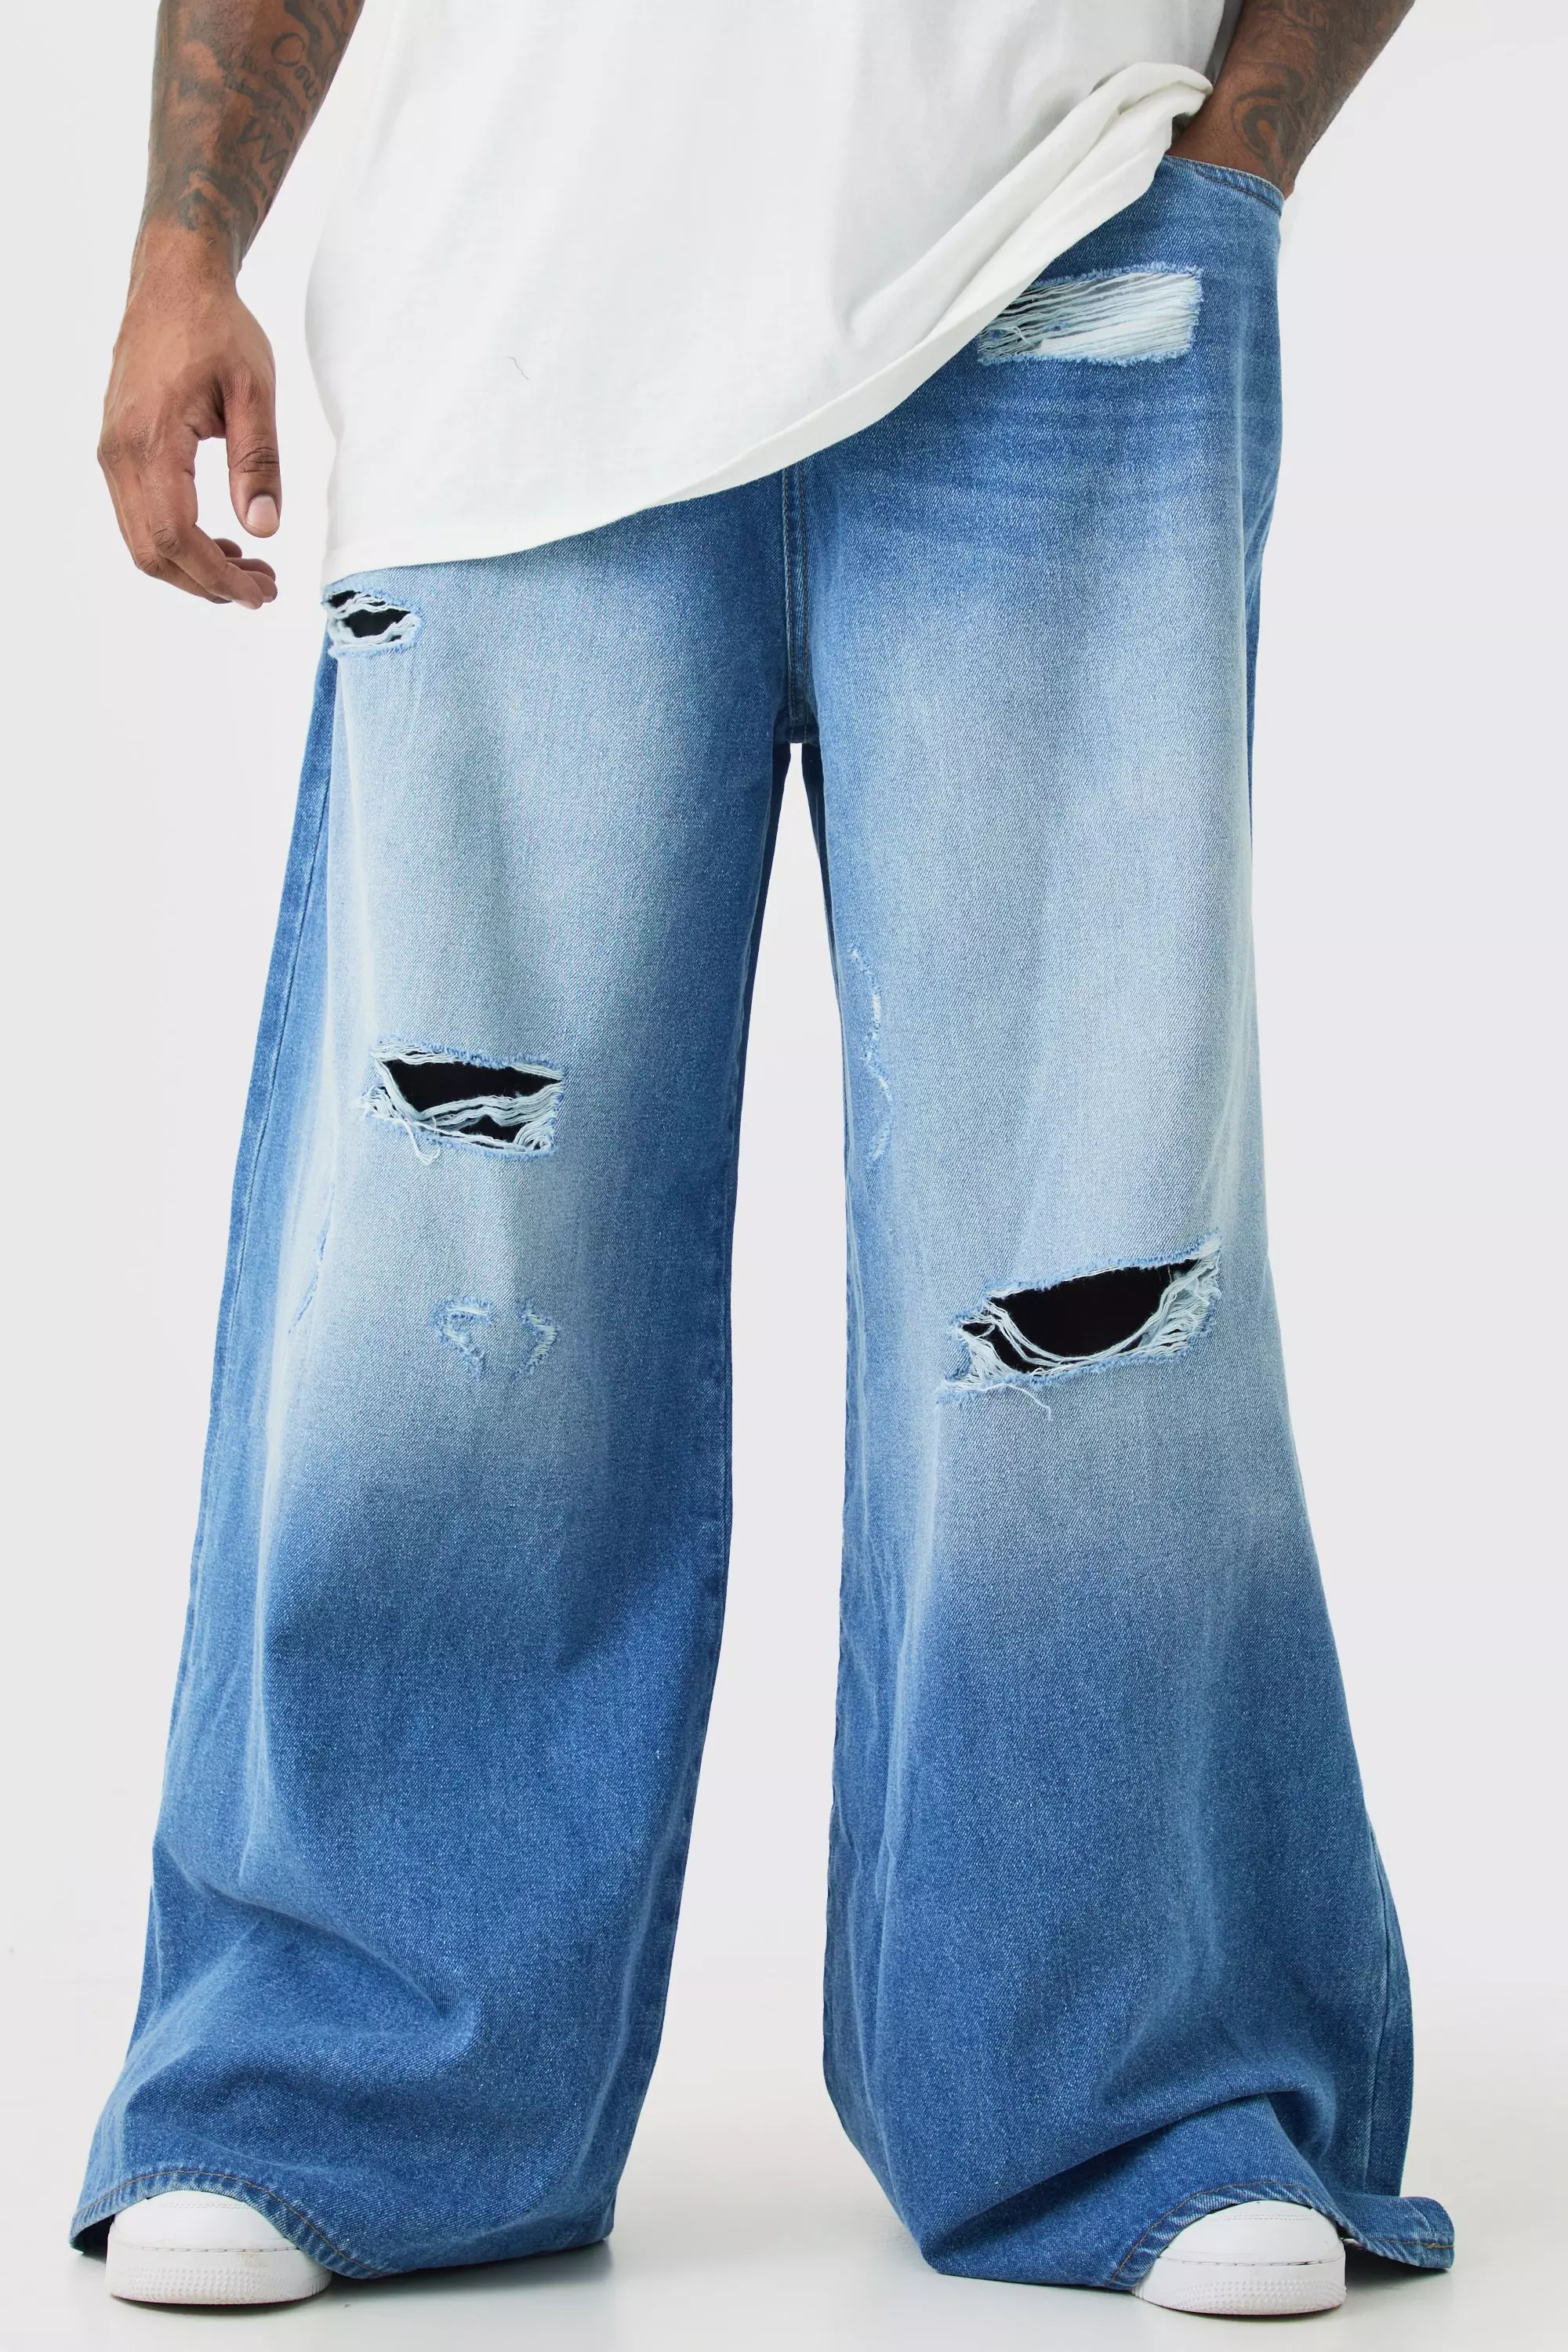 Plus Extreme Baggy Frayed Self Fabric Applique Jeans Light blue